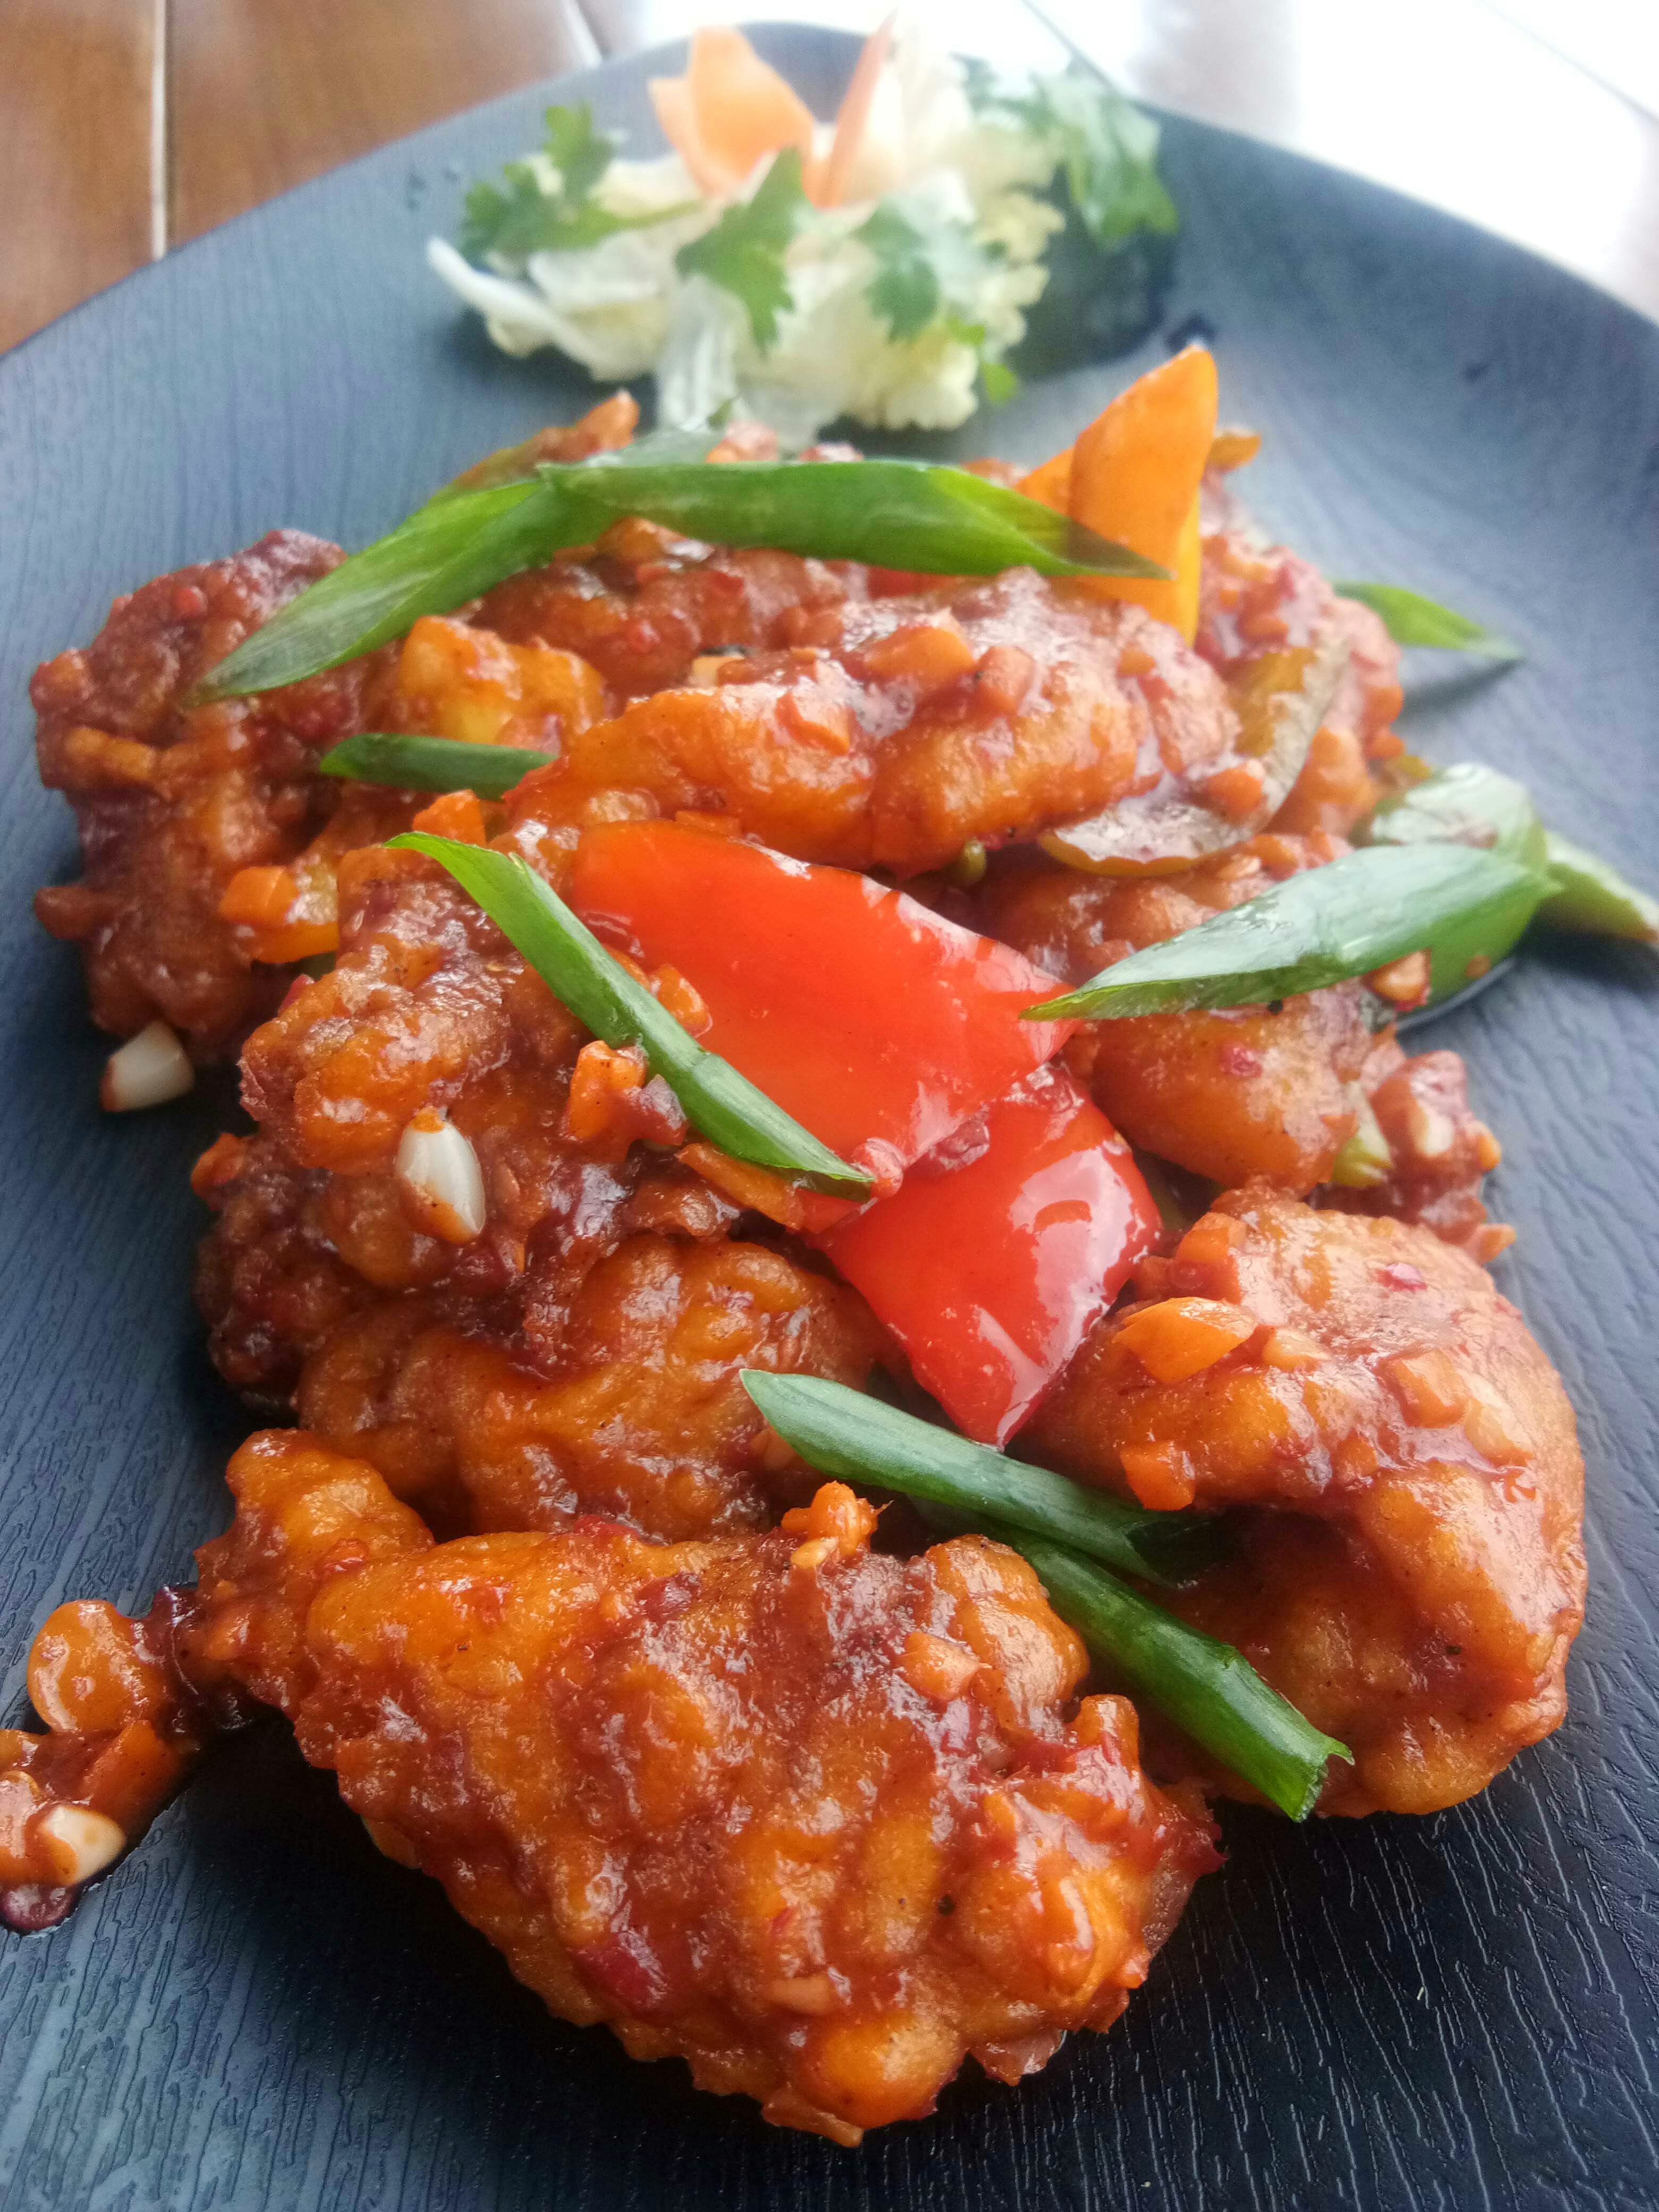 Dish,Food,Cuisine,Ingredient,Meat,General tso's chicken,Sweet and sour chicken,Fried food,Produce,Recipe